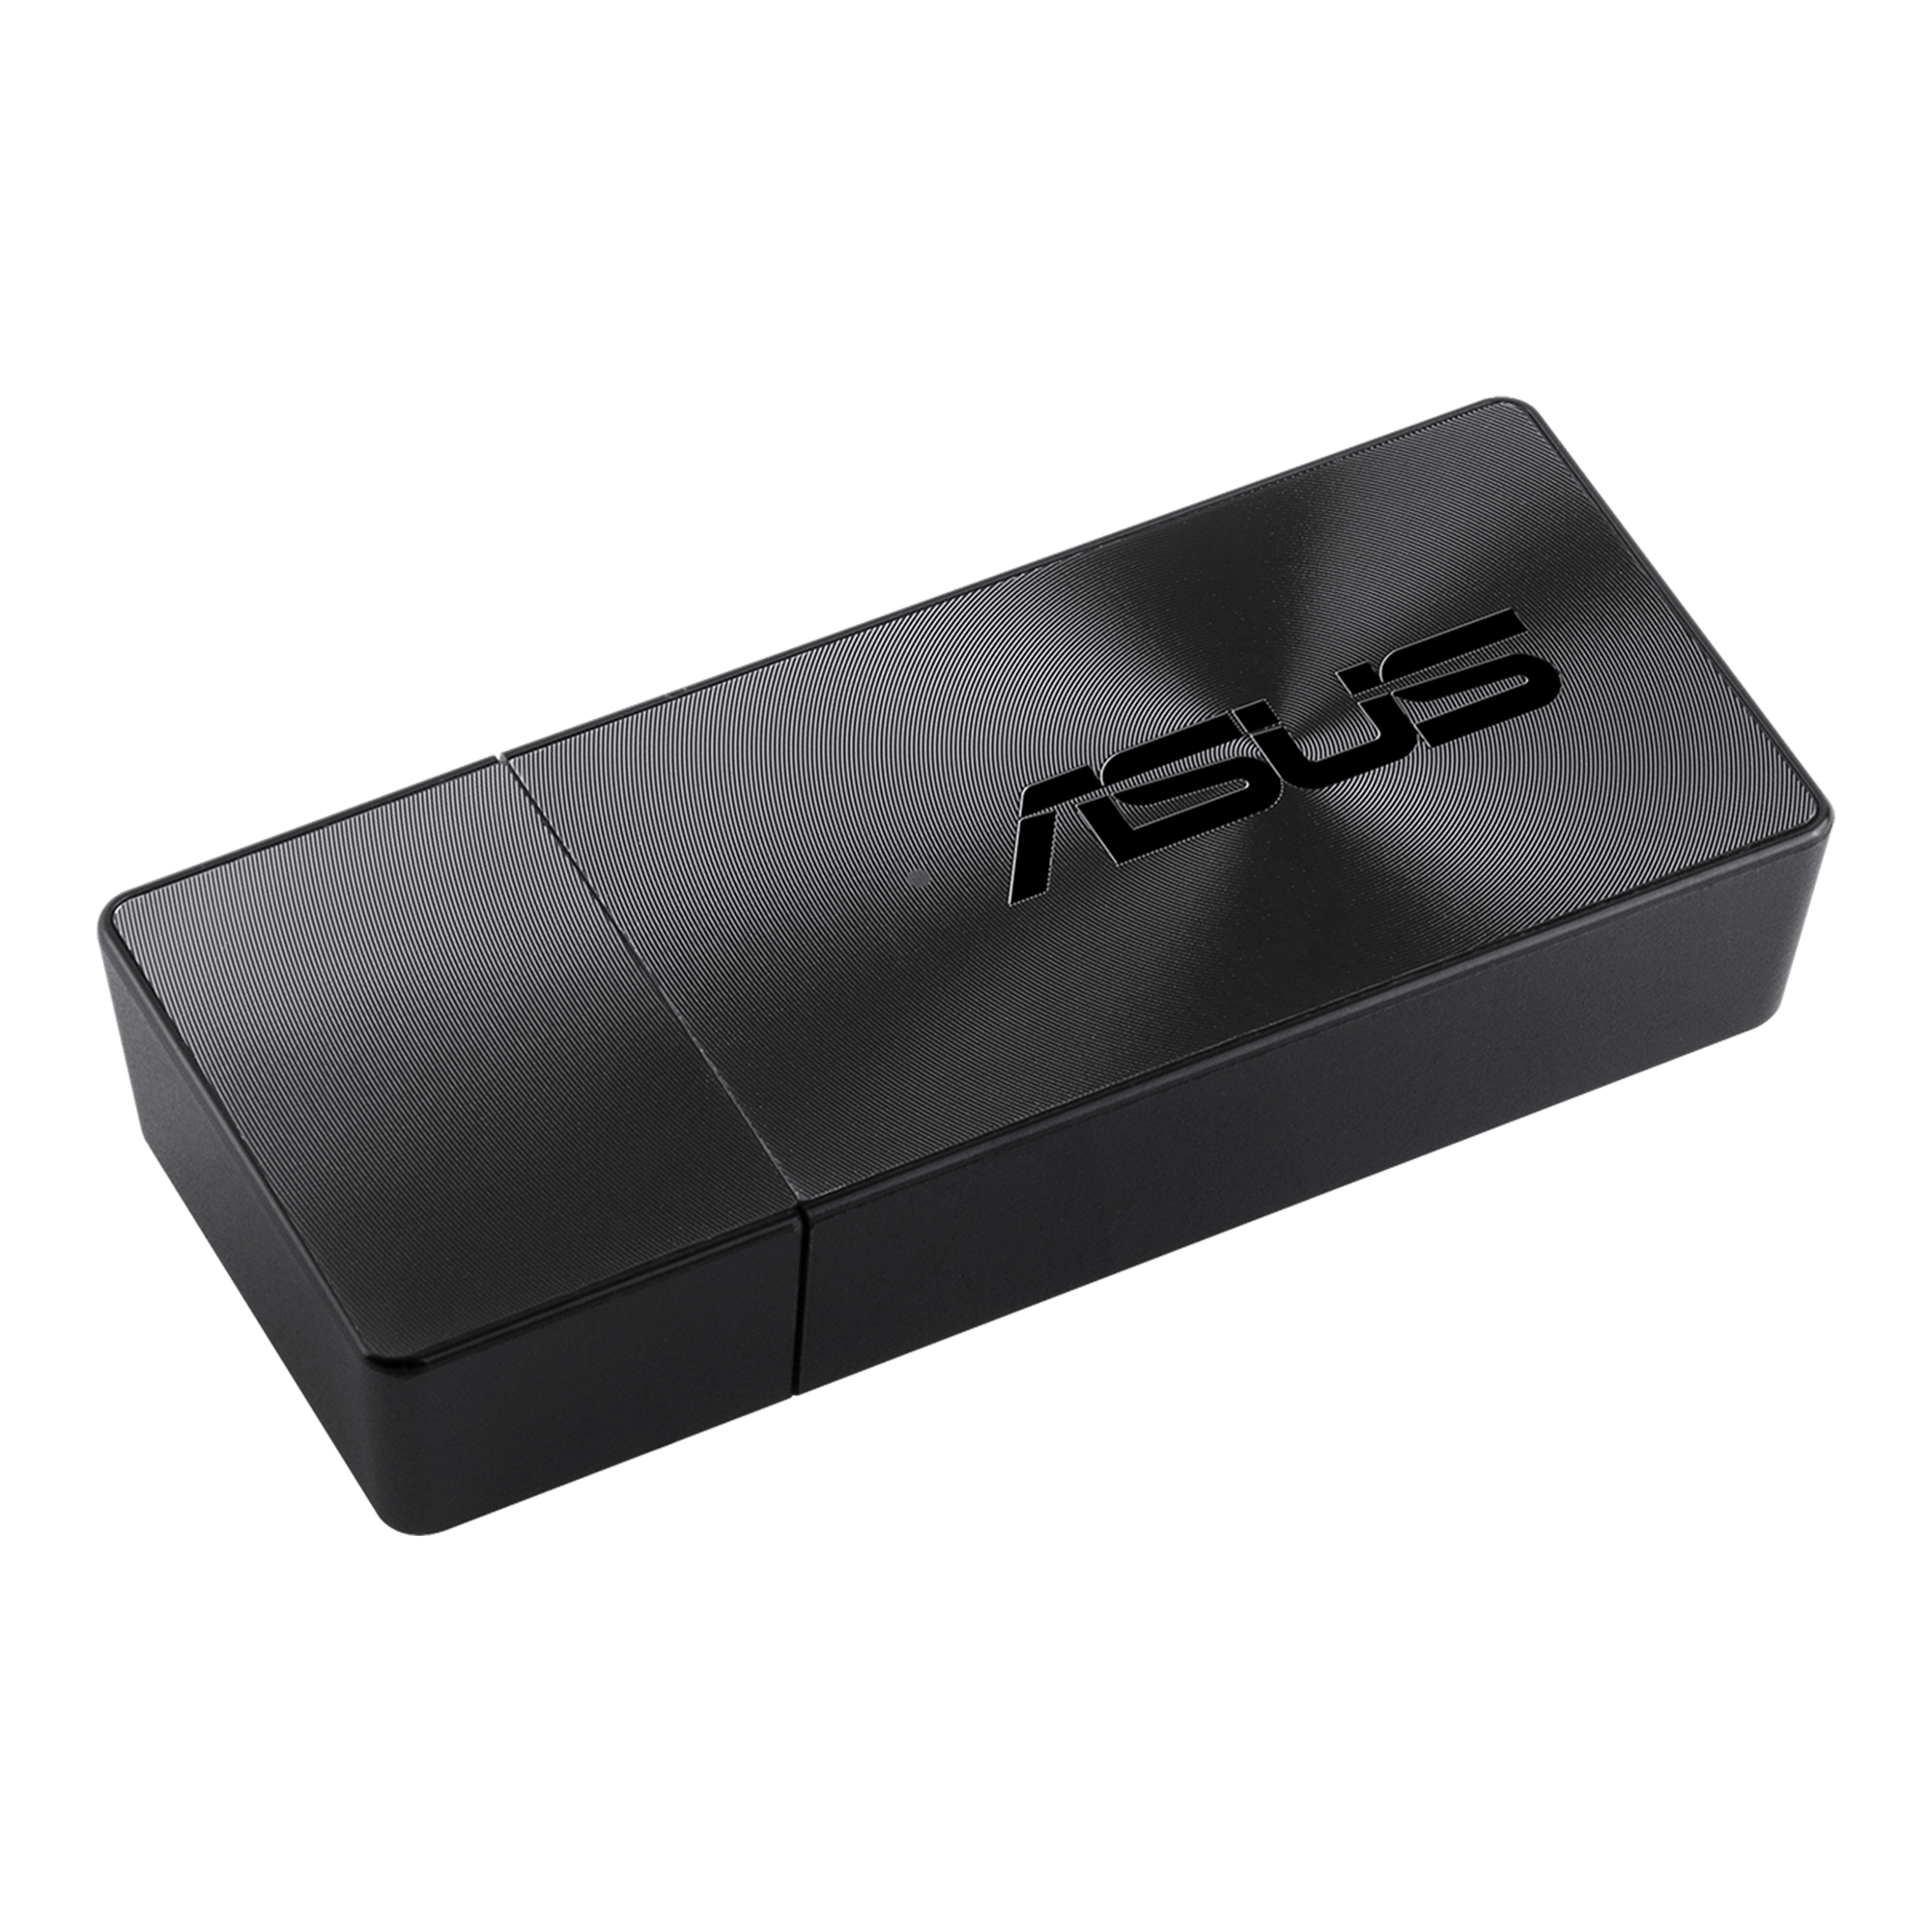 ASUS USB-AC55 B1 Linux Mint 19 Driver Installation - Featured